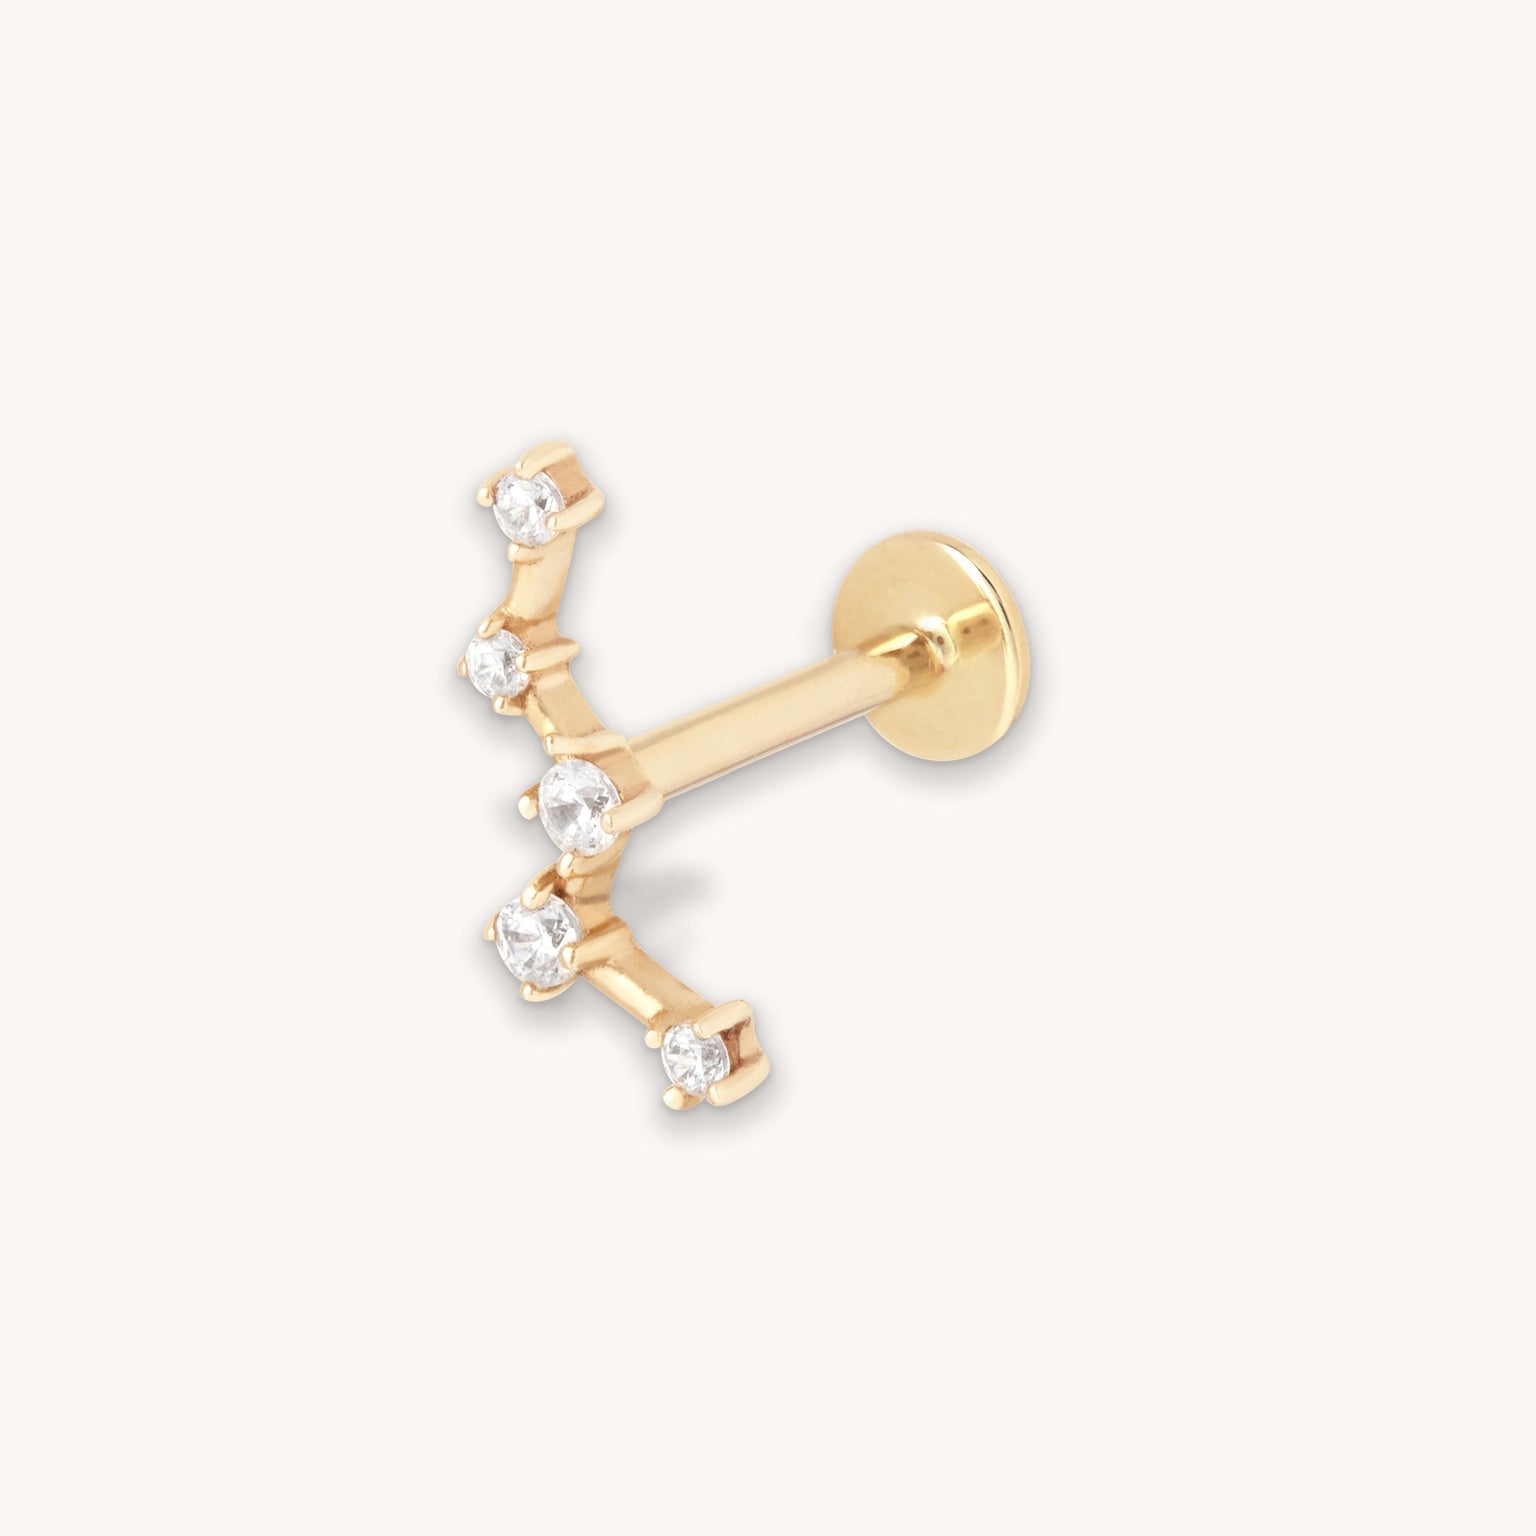 Constellation Piercing Stud 6mm in Solid Gold